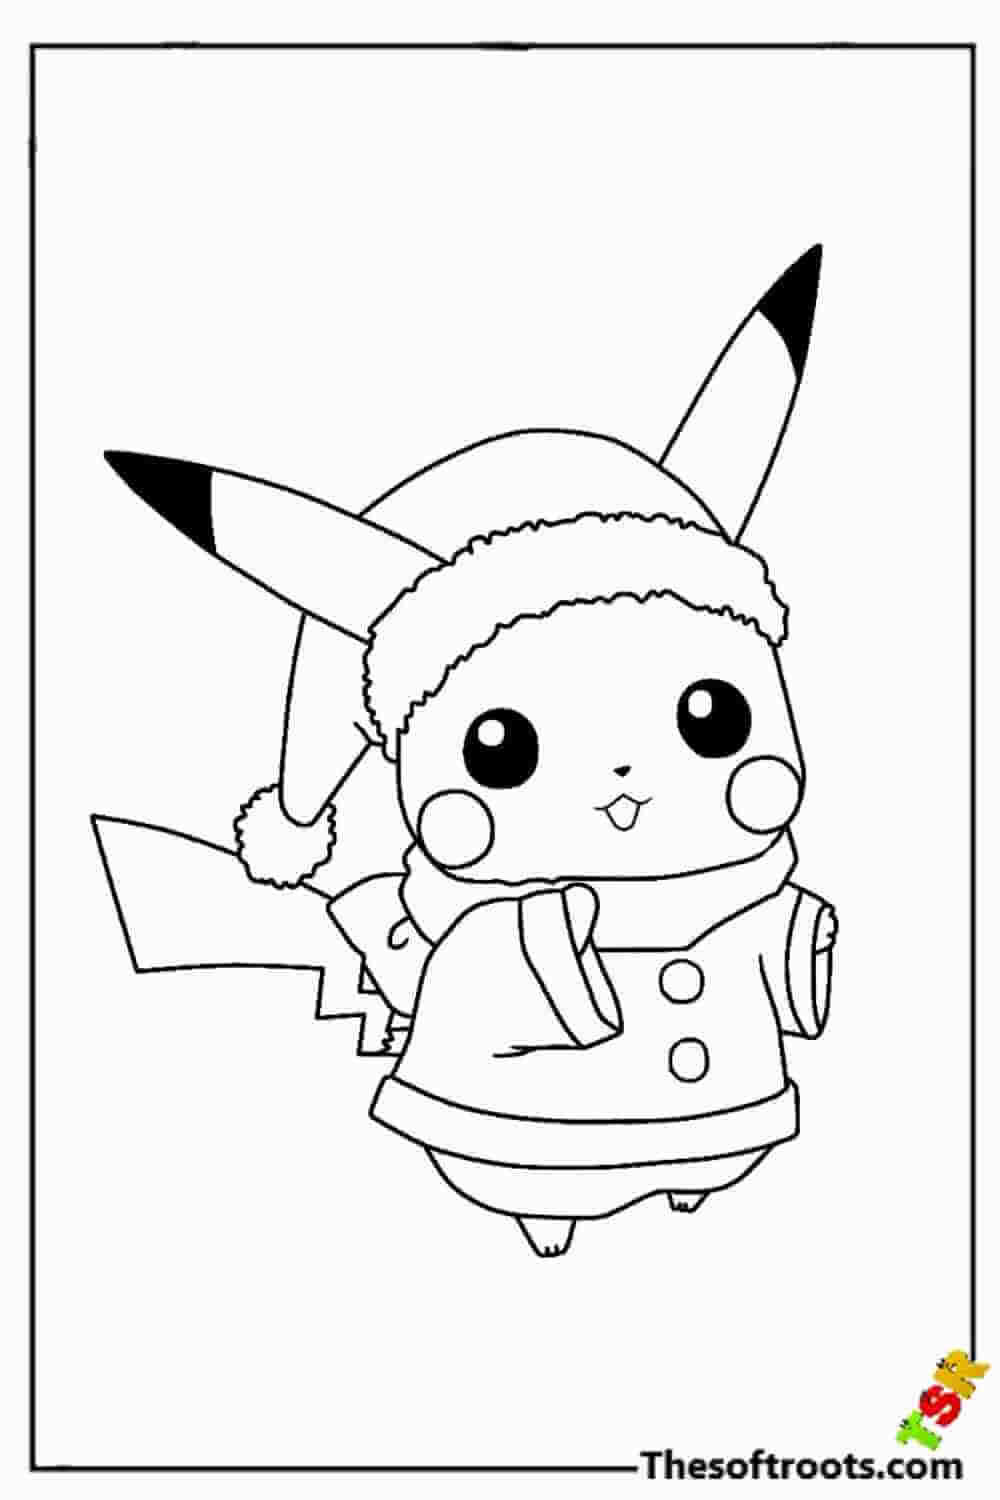 Christmas Pikachu coloring pages